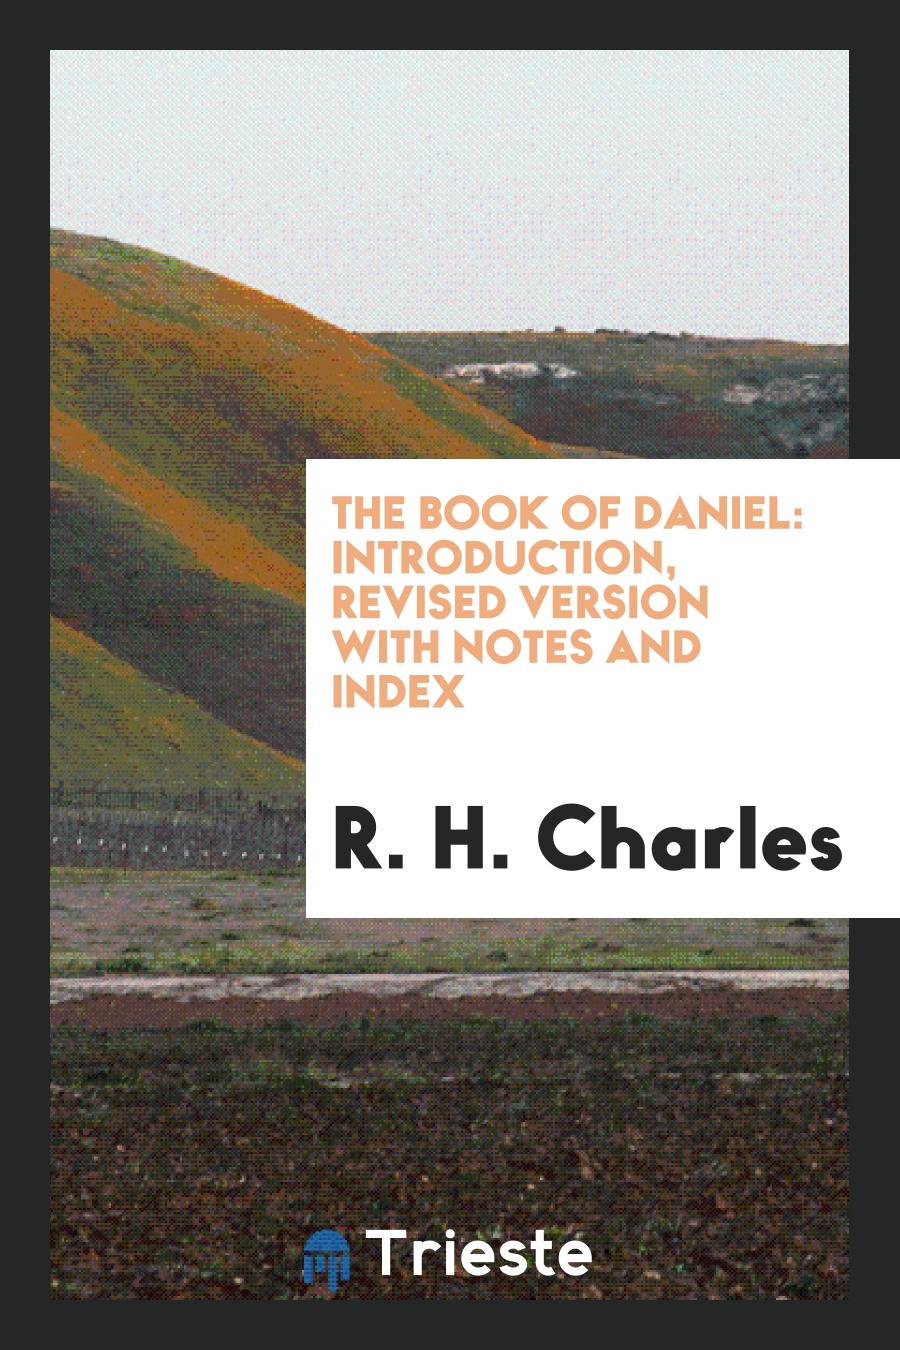 The Book of Daniel: Introduction, Revised Version with Notes and Index